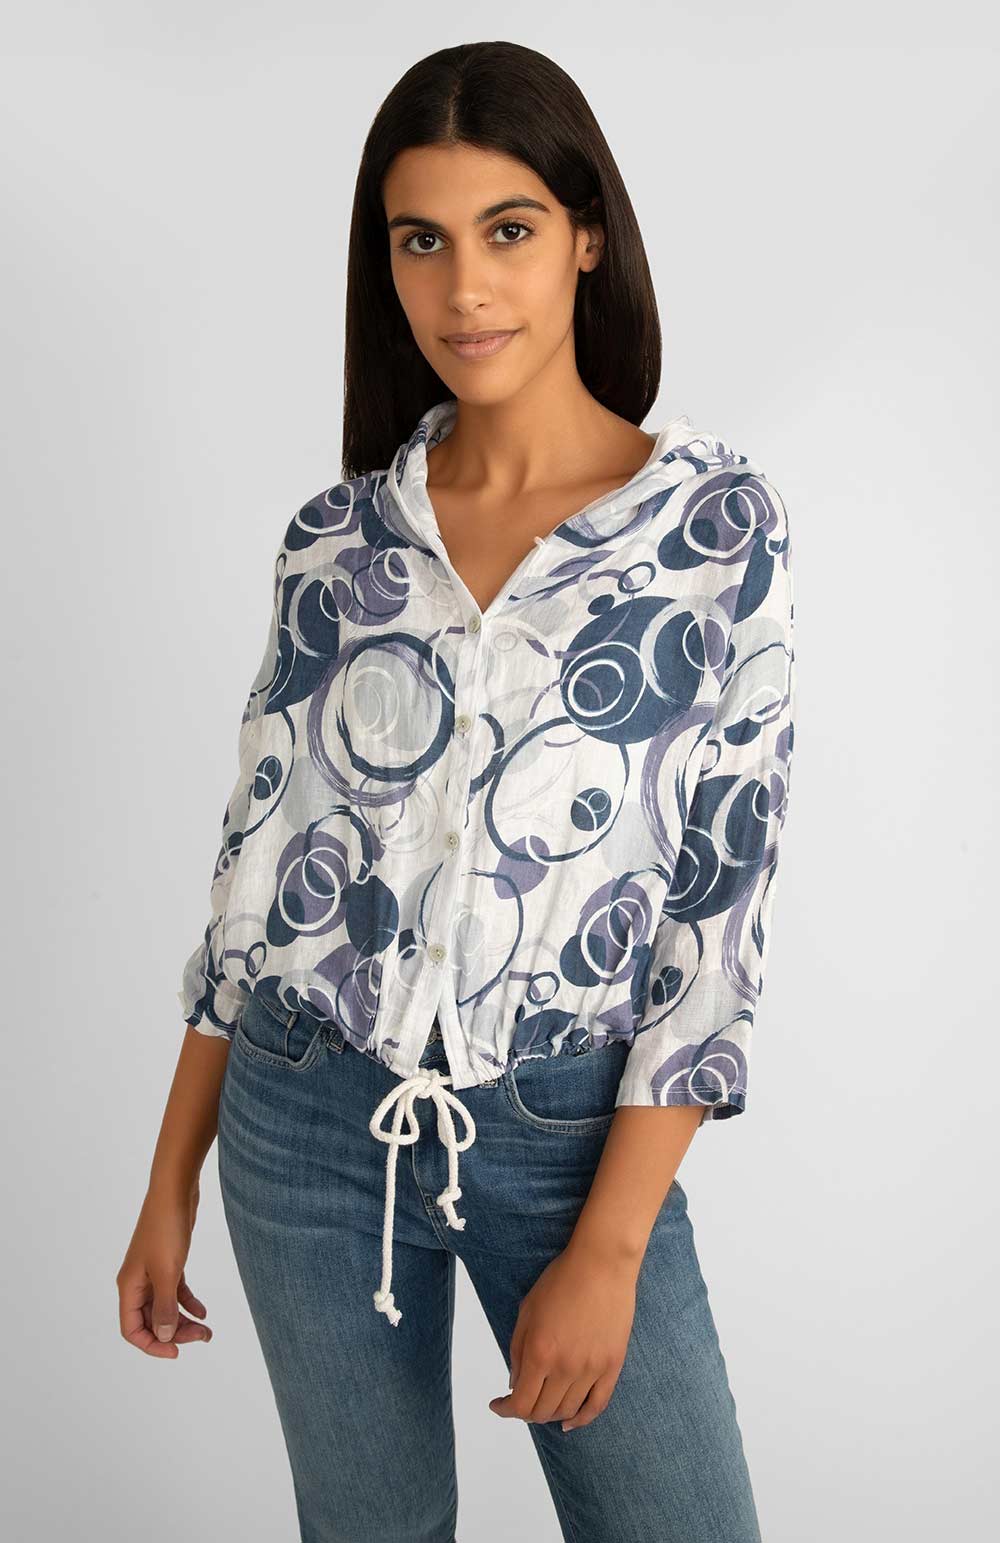 Me & Gee (19-02588) Women's 3/4 Sleeve Cropped Circle Print Linen Jacket with Hood for Summer in White with Blue Graphic Circle Print